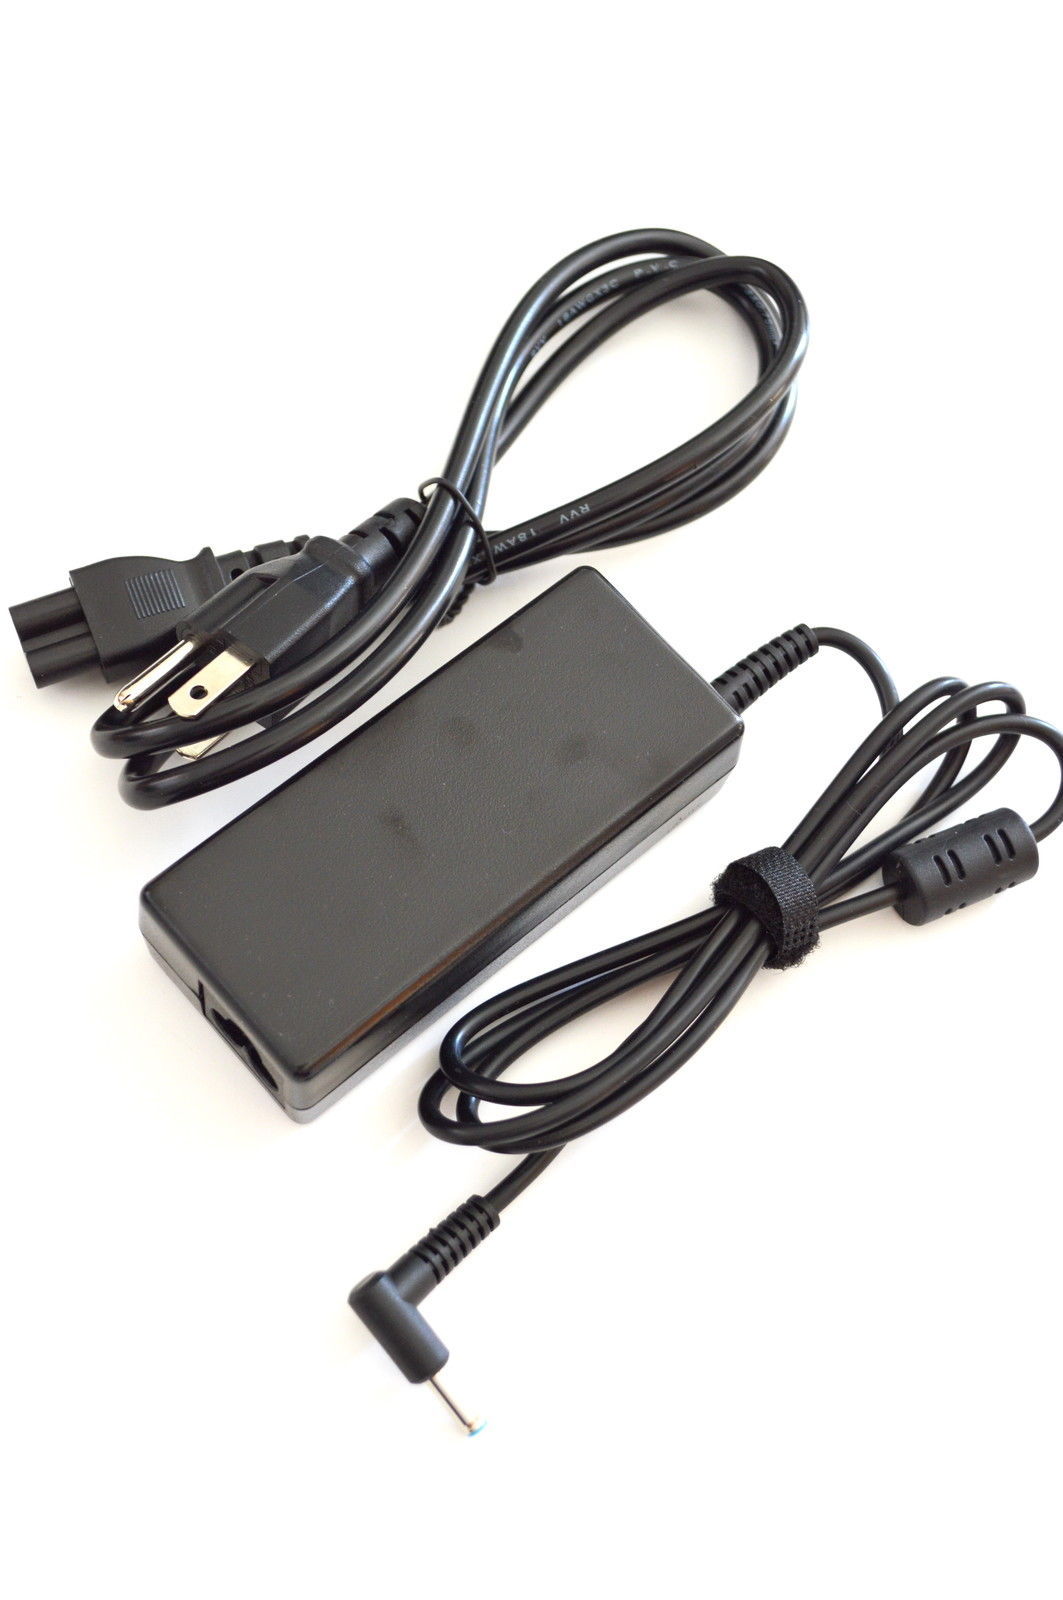 Primary image for AC Adapter Charger for HP ENVY x360 15-u010dx 15-u011dx Convertible PC Hp Laptop